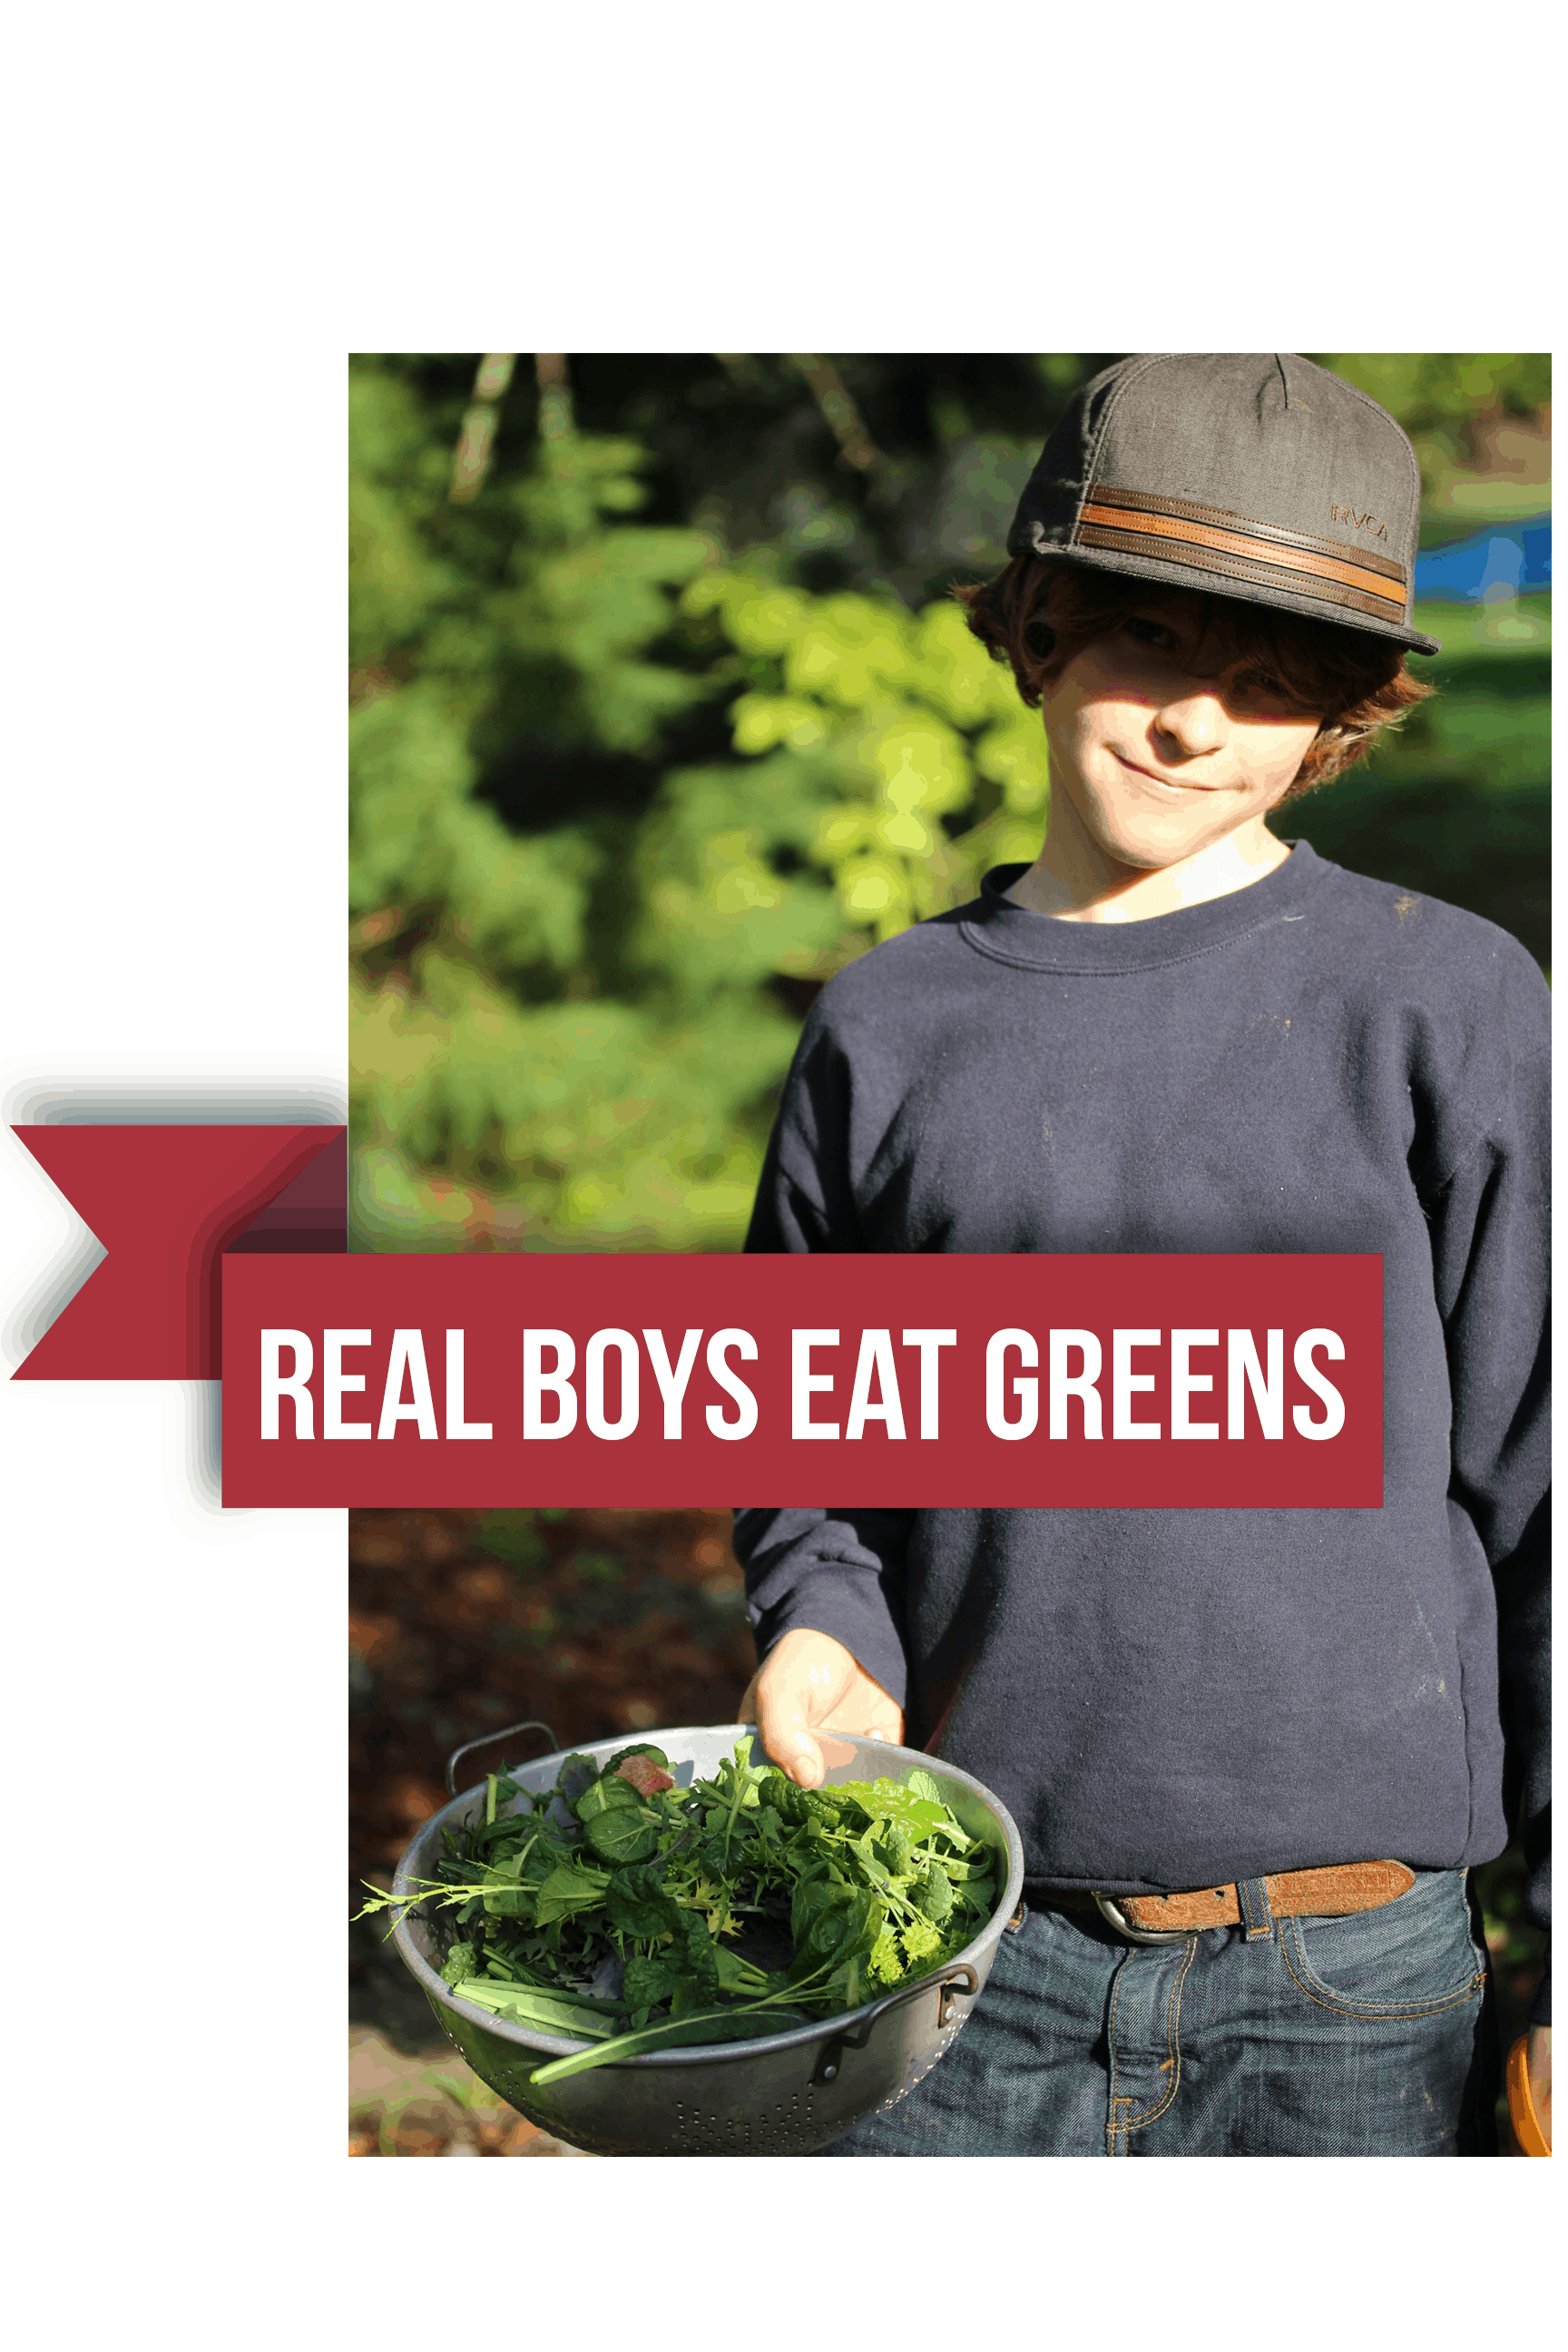 Real Boys Eat Greens: How to Get Kids to Eat Veggies